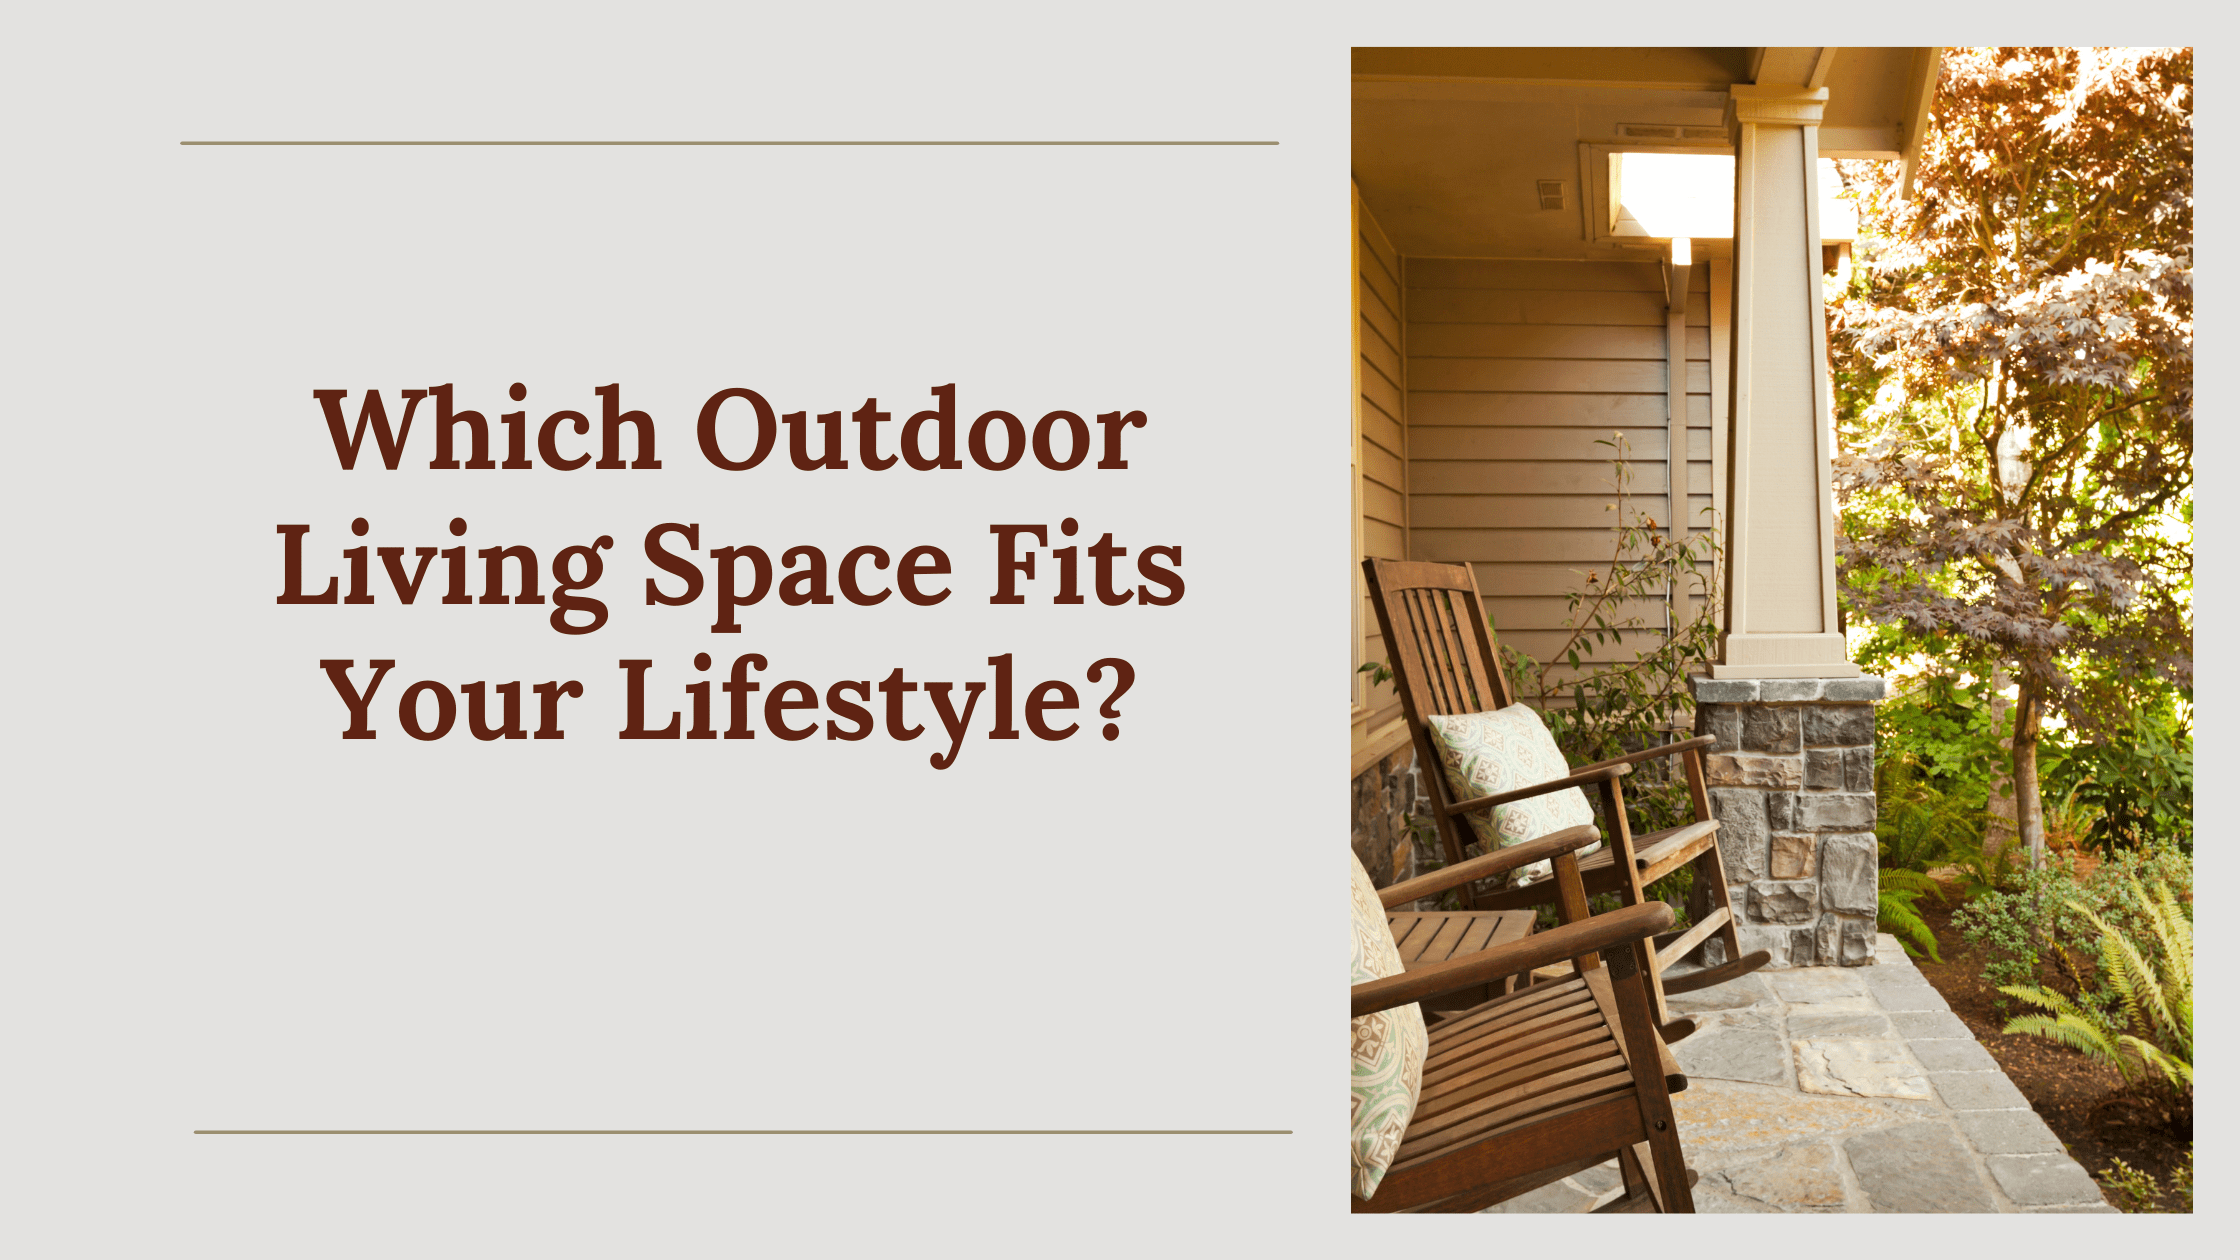 Which Outdoor Living Space Fits Your Lifestyle?